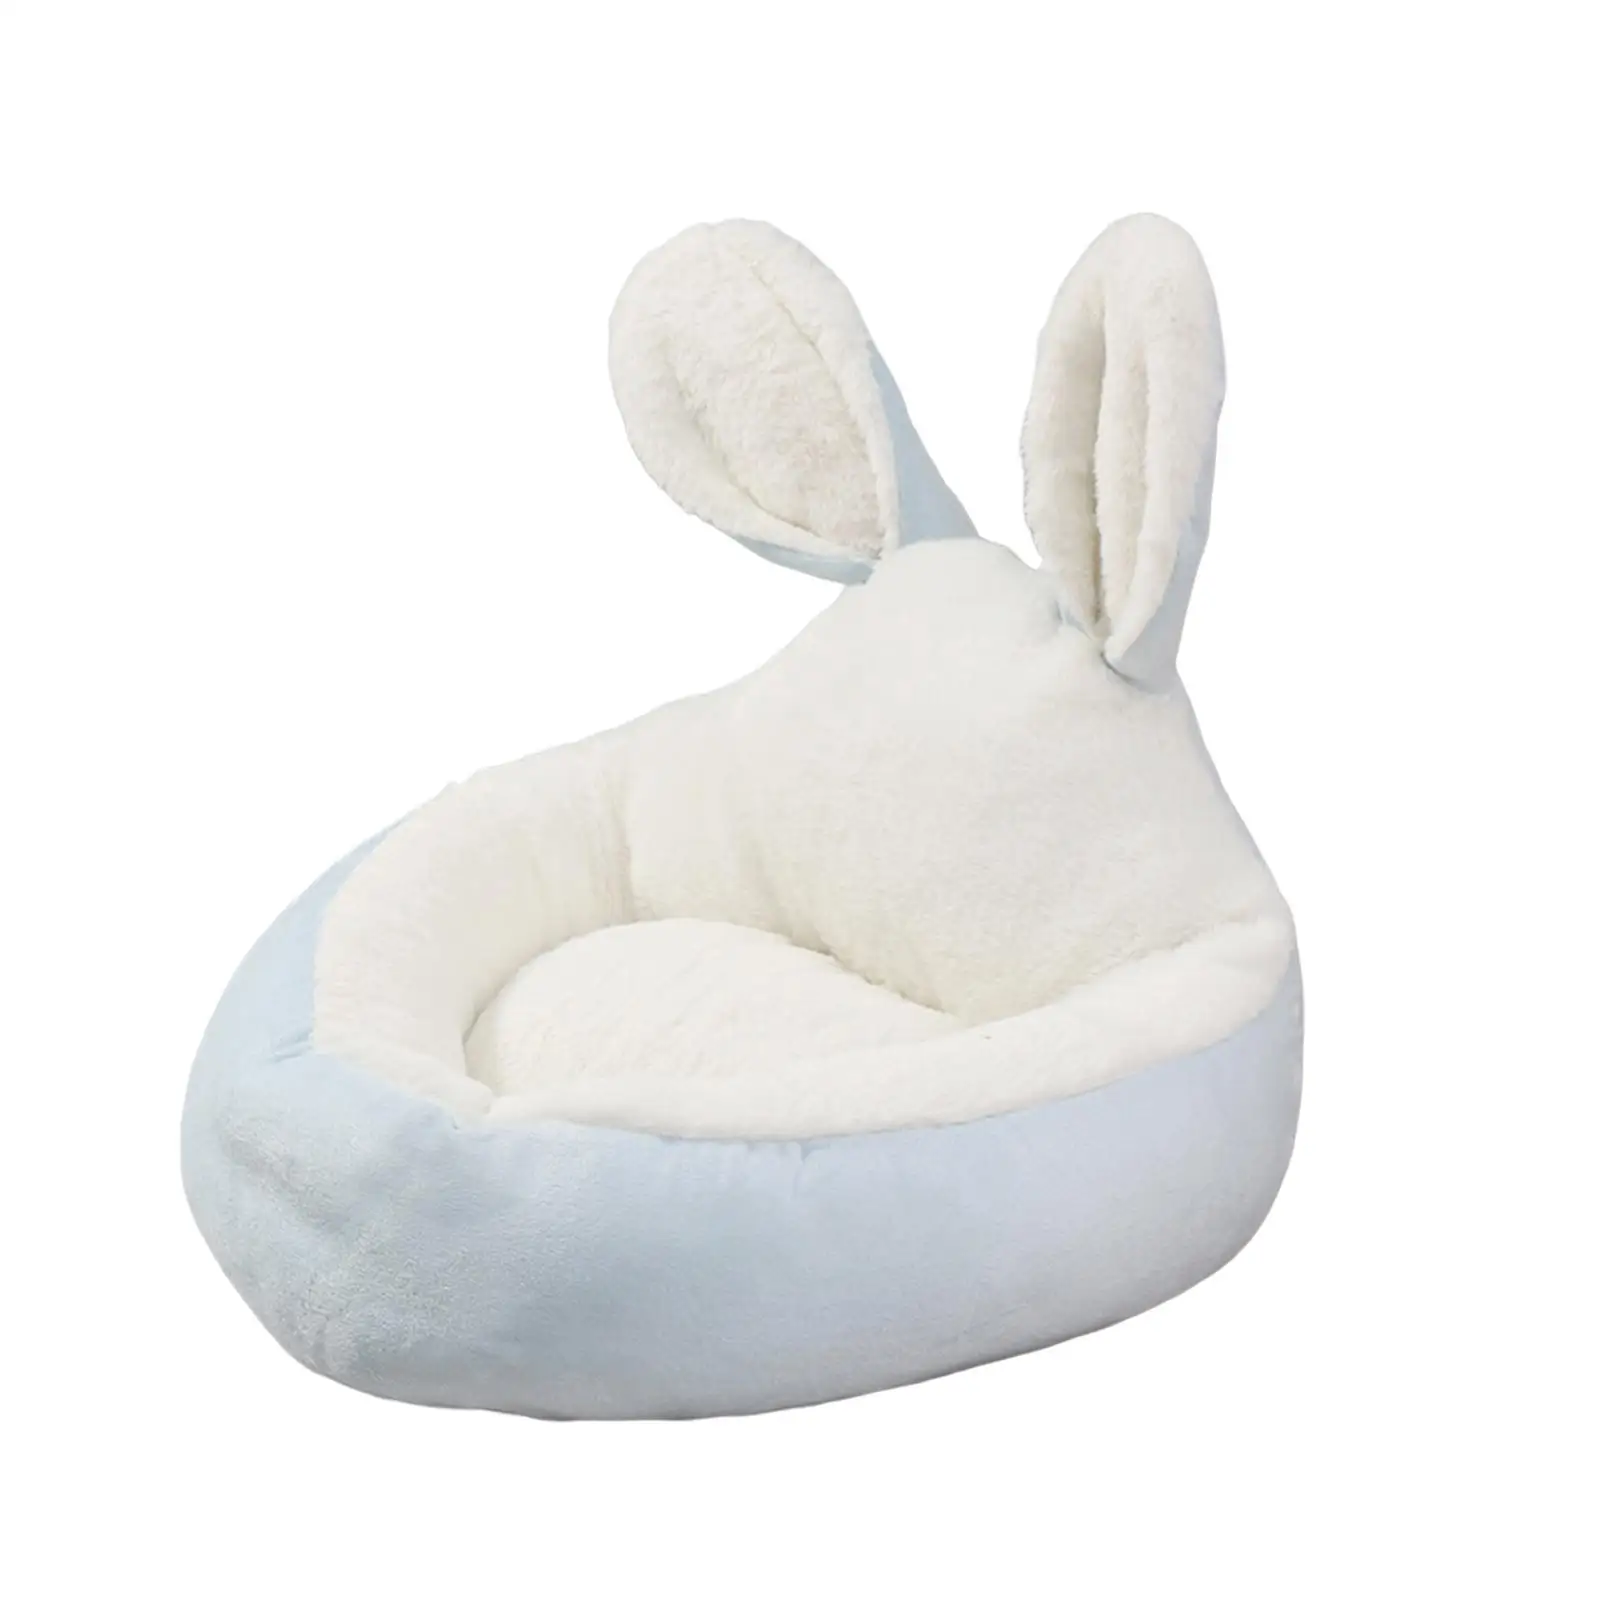 Pet Bed Nonslip Bottom Cat Sleeping Pad Winter Warm Nest Bunny Ears Decor Dog Bed Puppy Kennel for Small Medium Dogs Cats